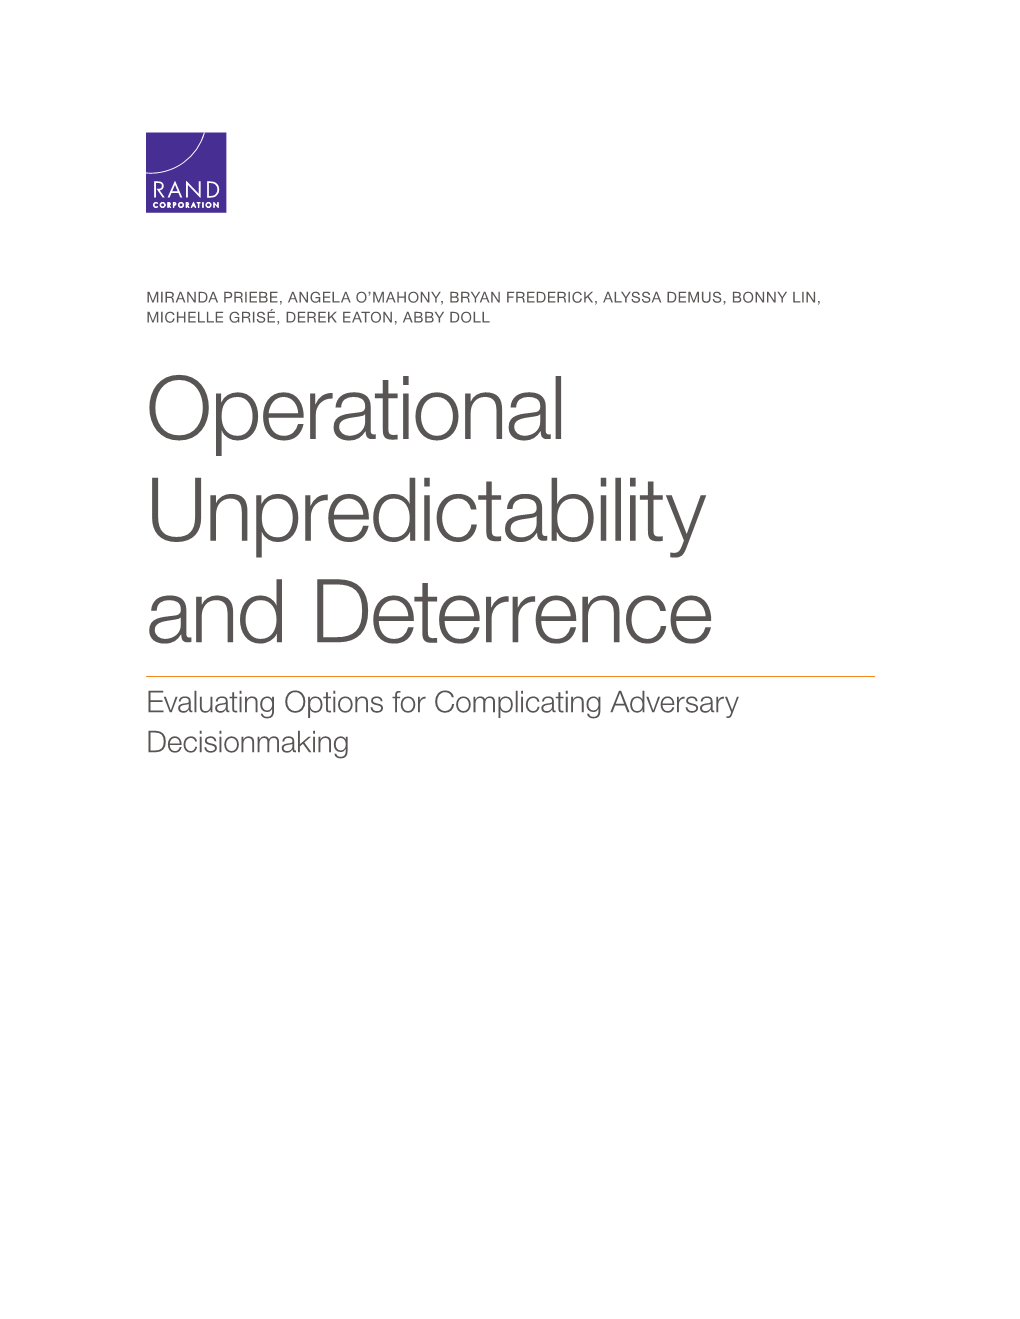 Operational Unpredictability and Deterrence